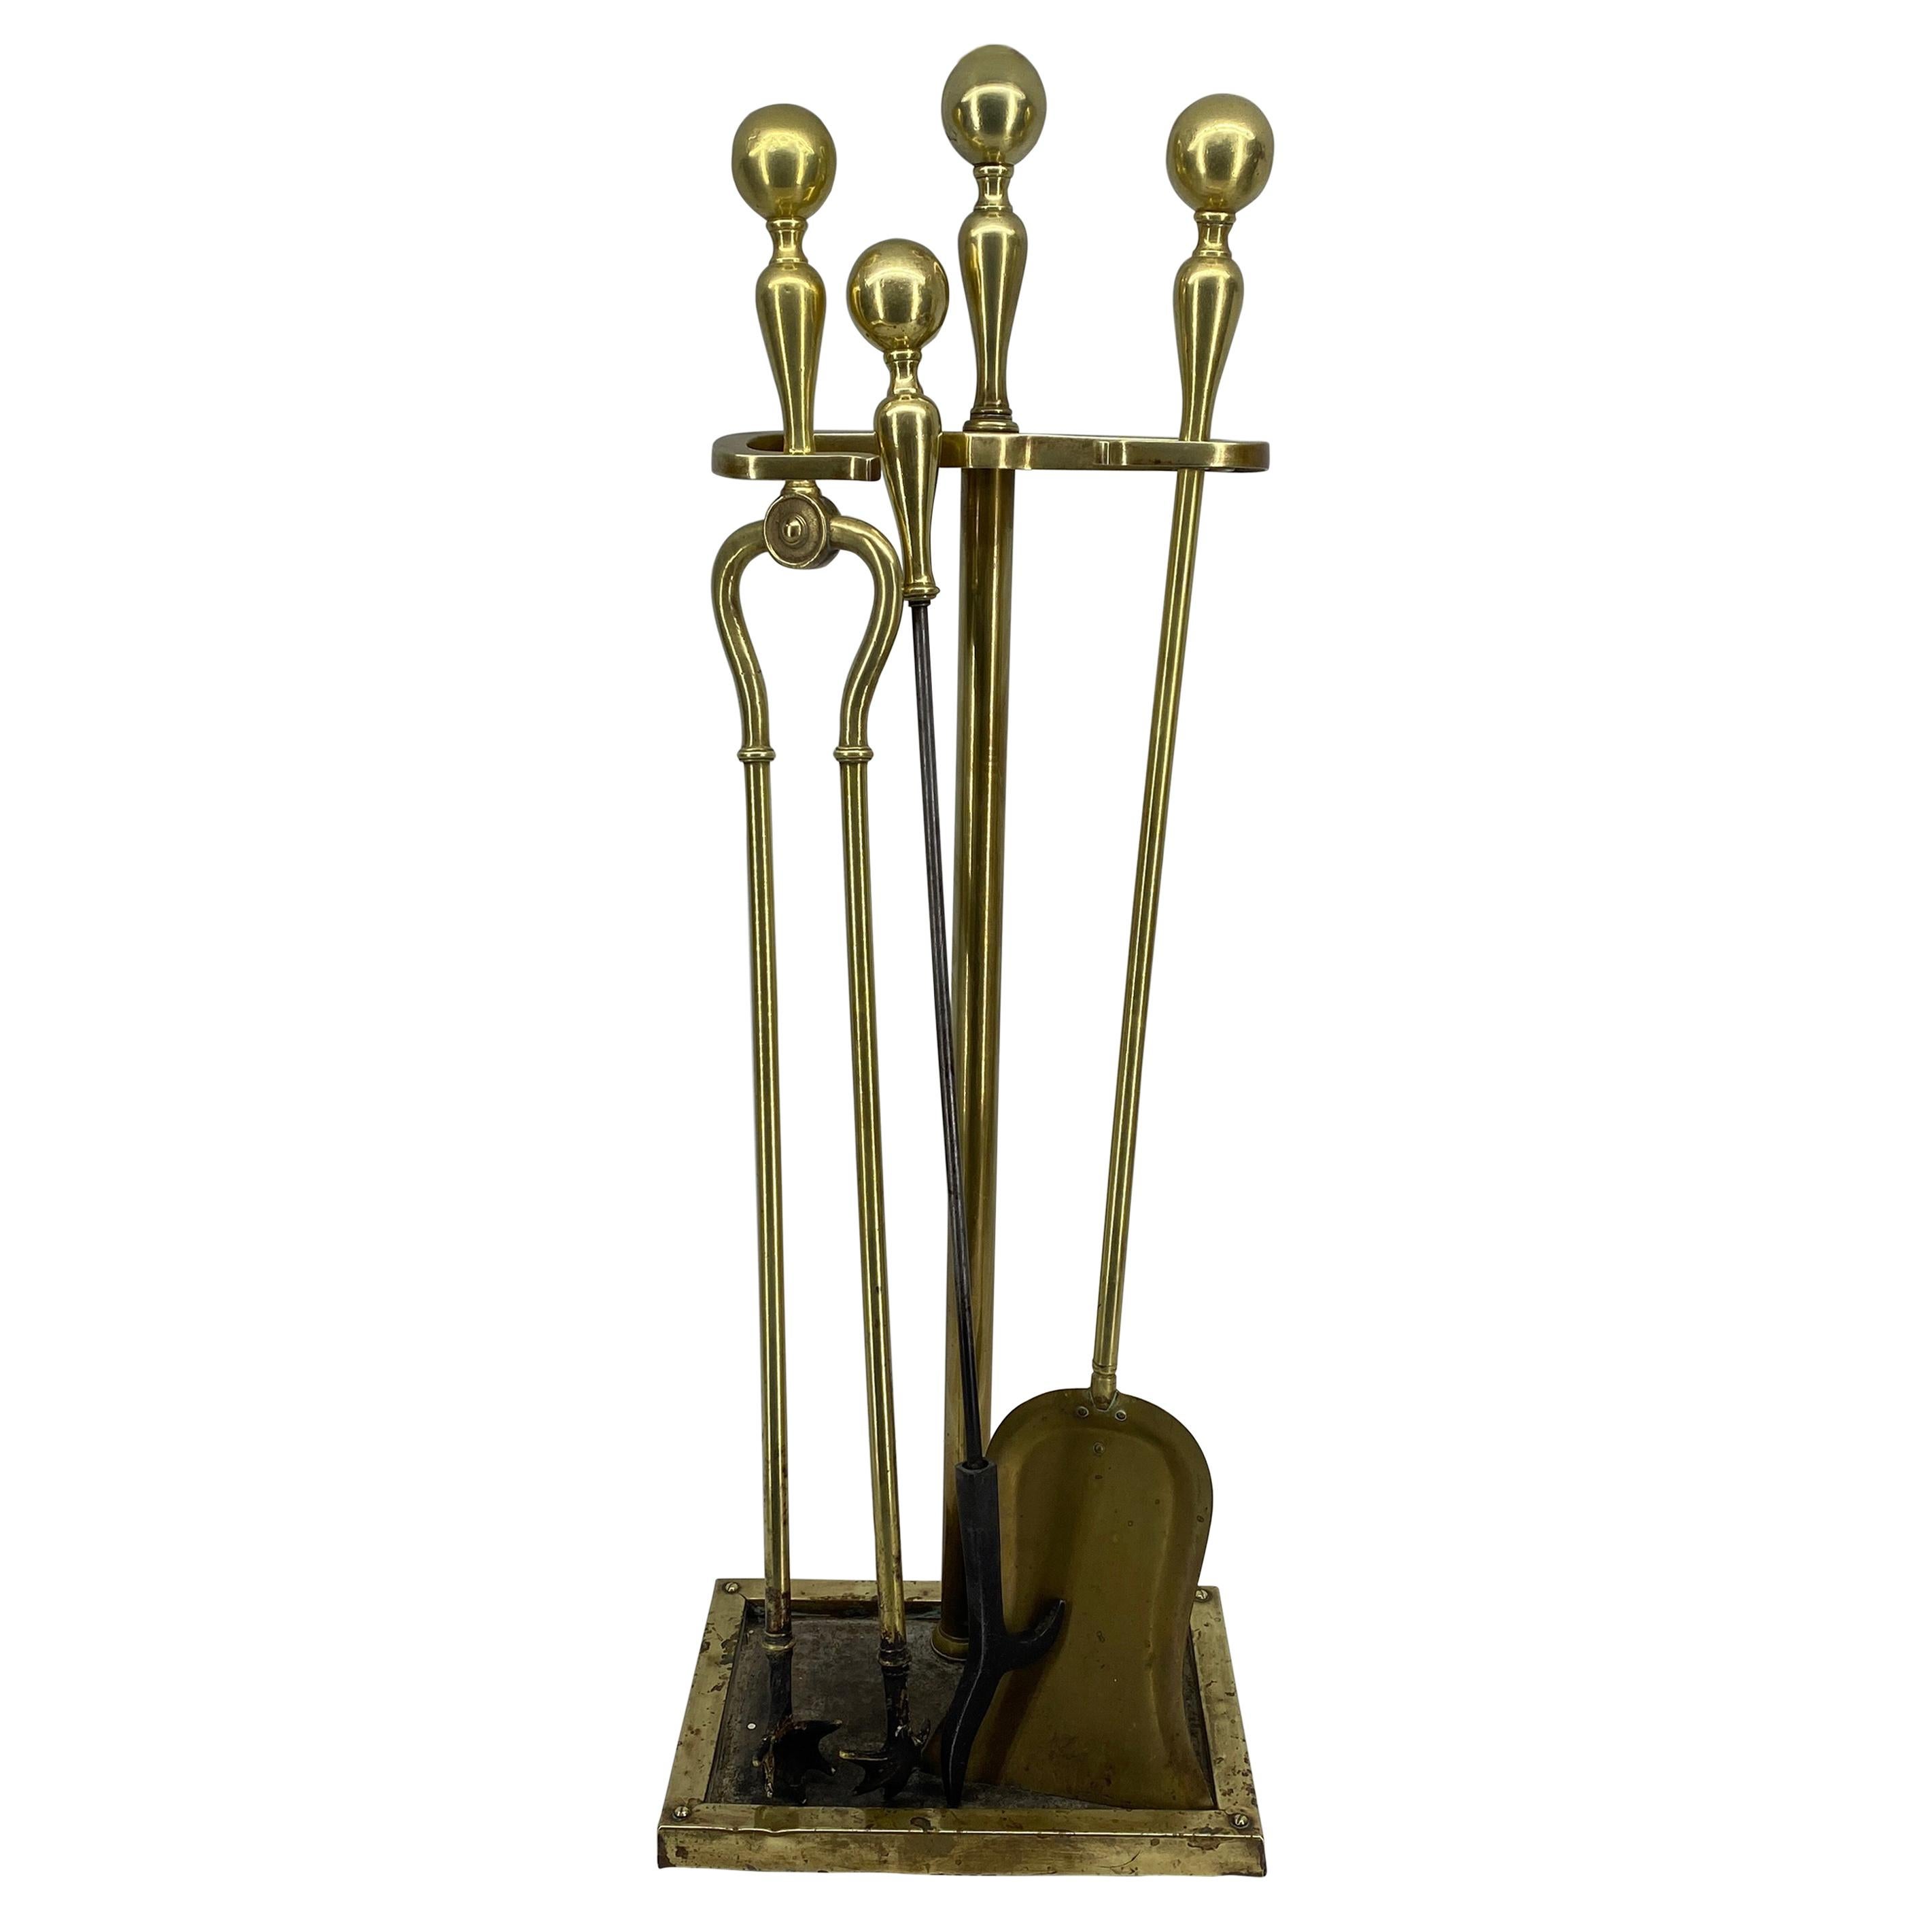 Danish 3-Piece Set of Brass Fireplace Tools and Stand, Late 19th Century